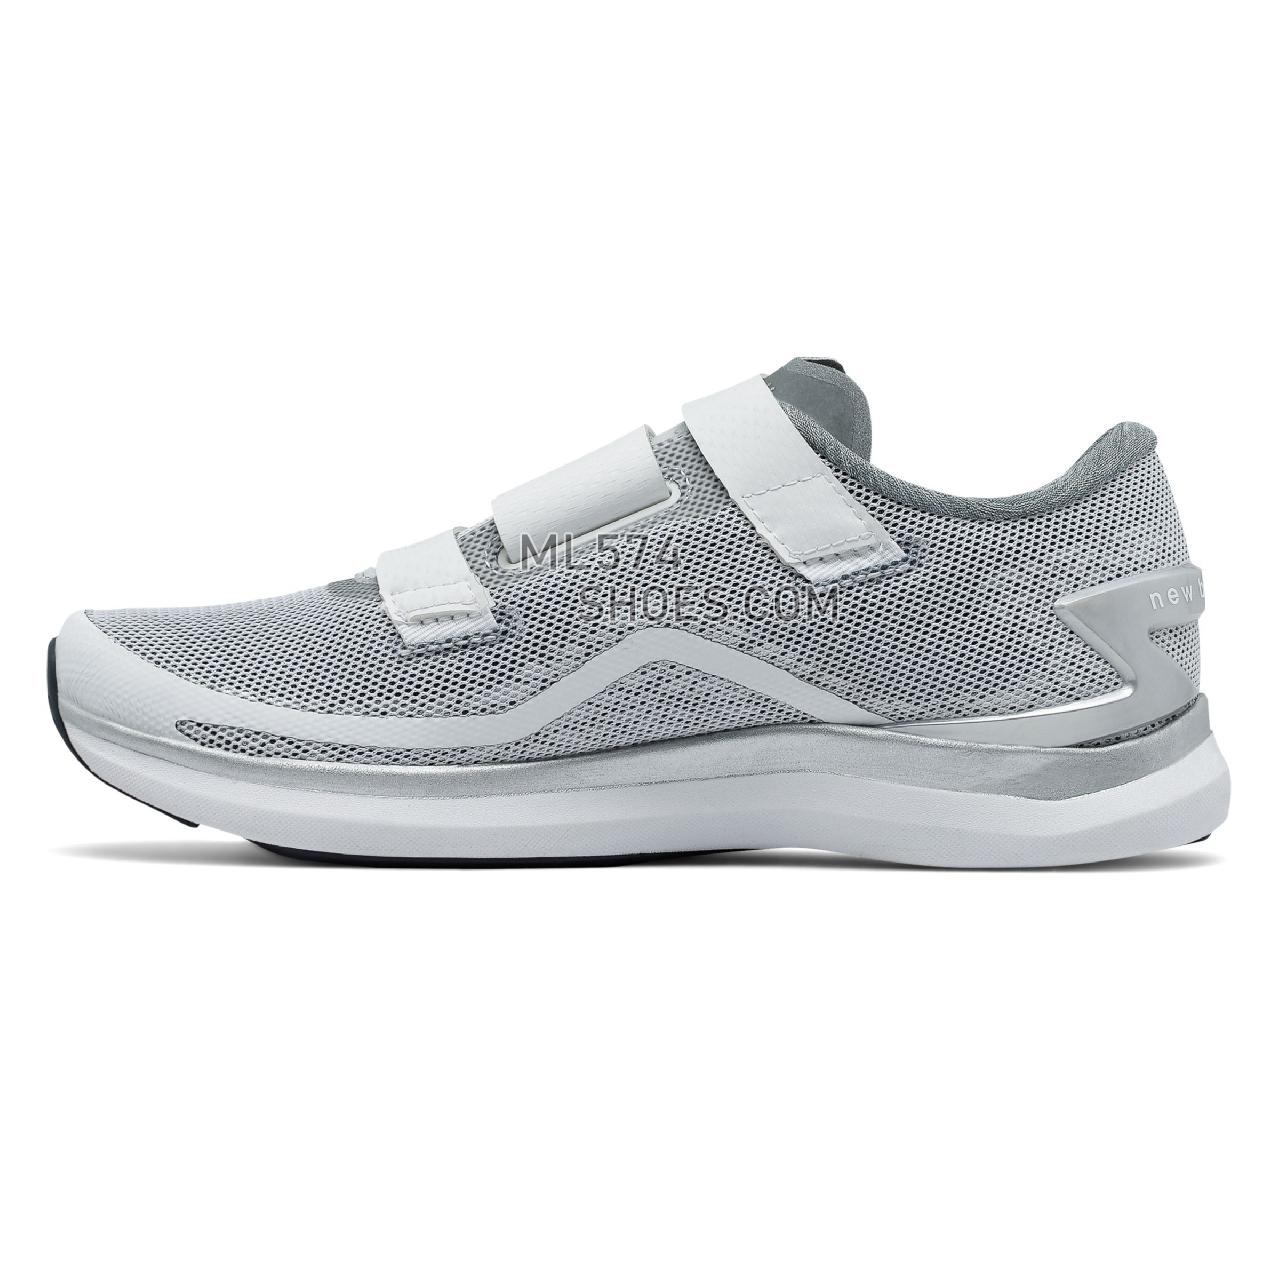 New Balance NBCycle WX09 - Women's 09 - X-training White with Thunder and Silver Mink - WX09WH